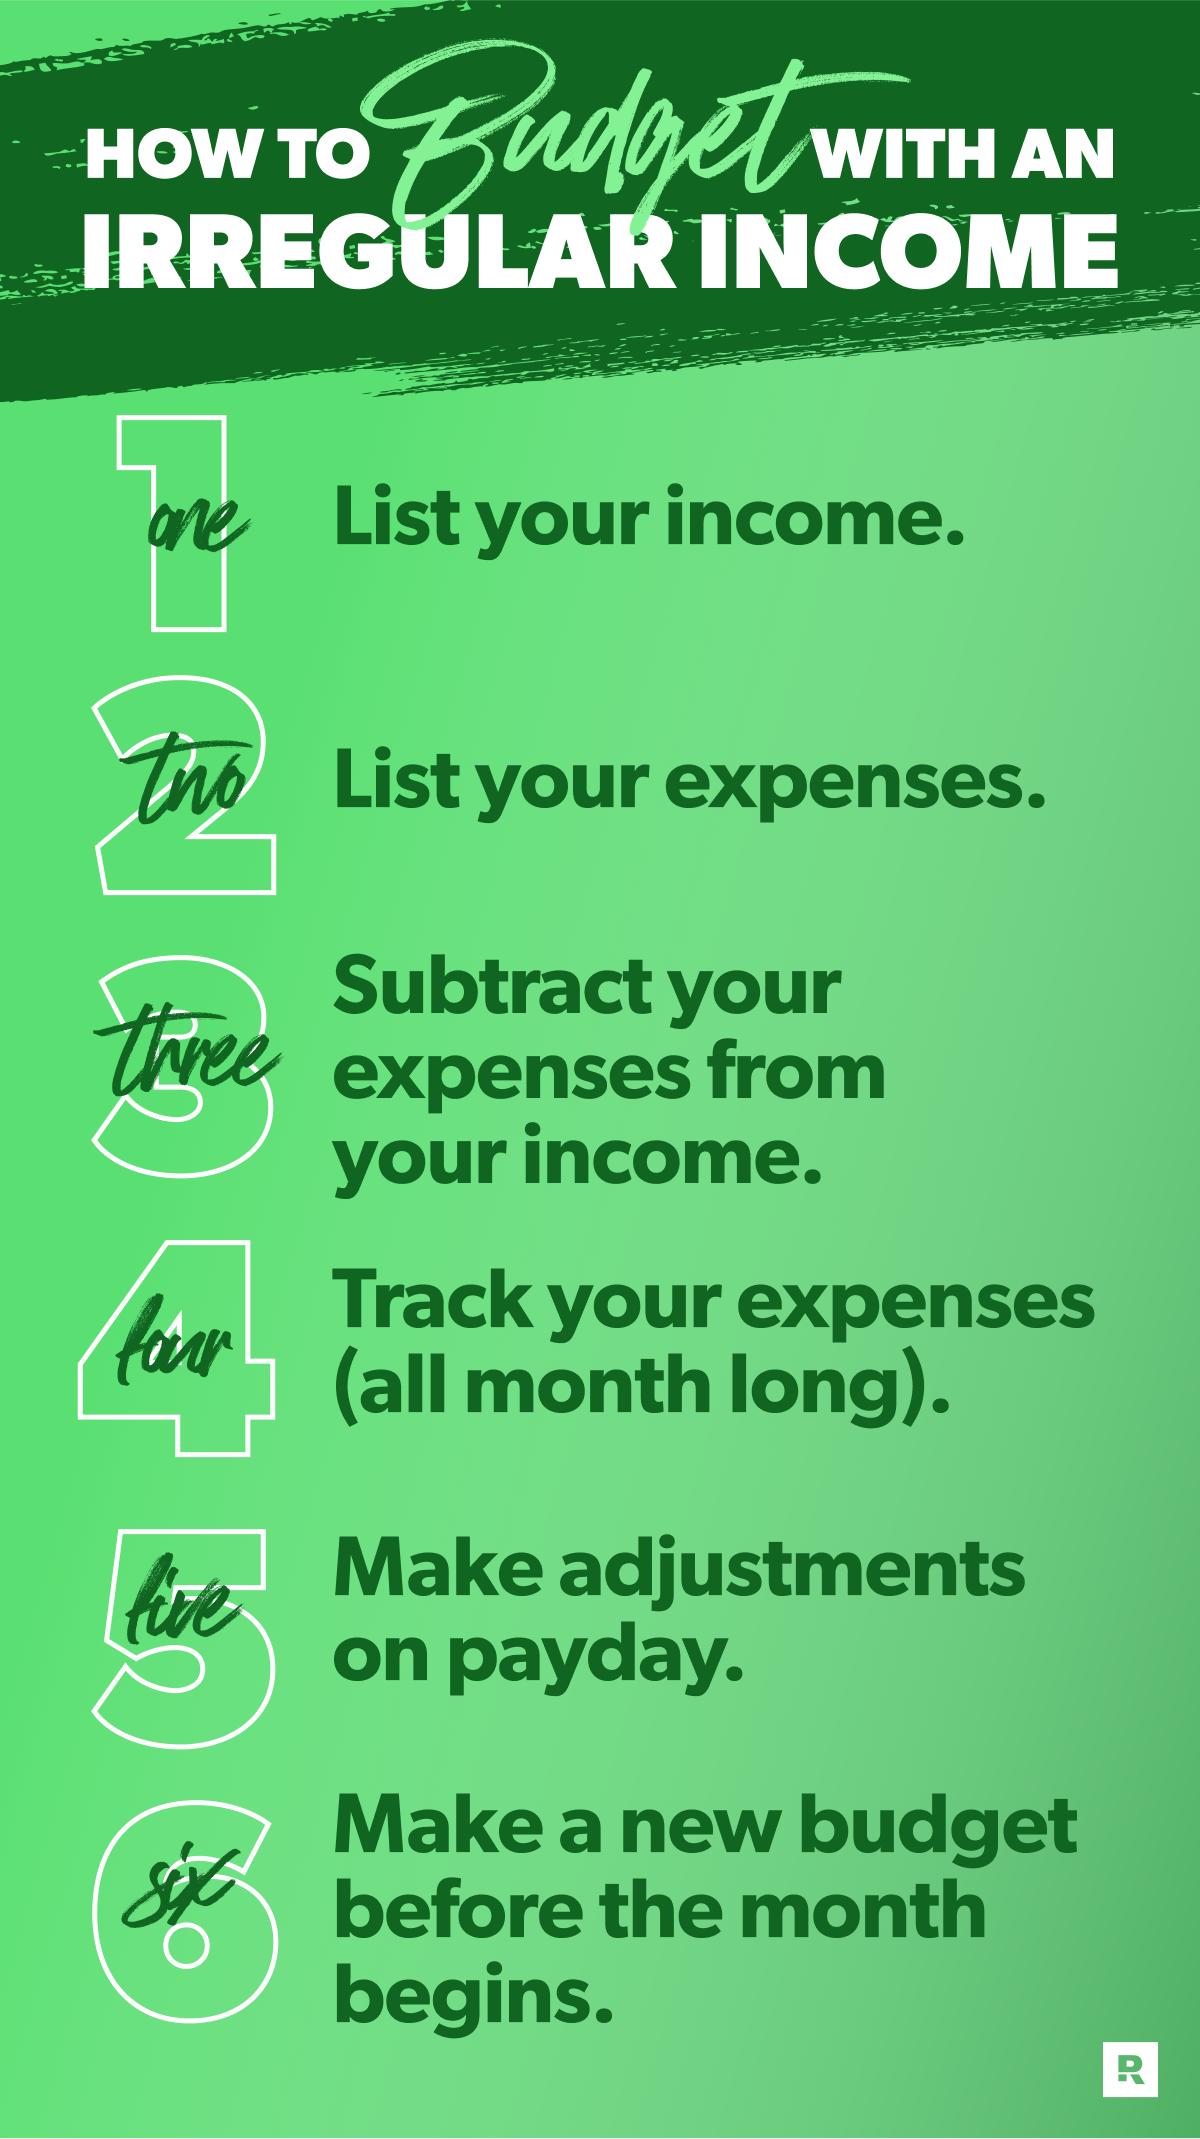 how to budget with an irregular income